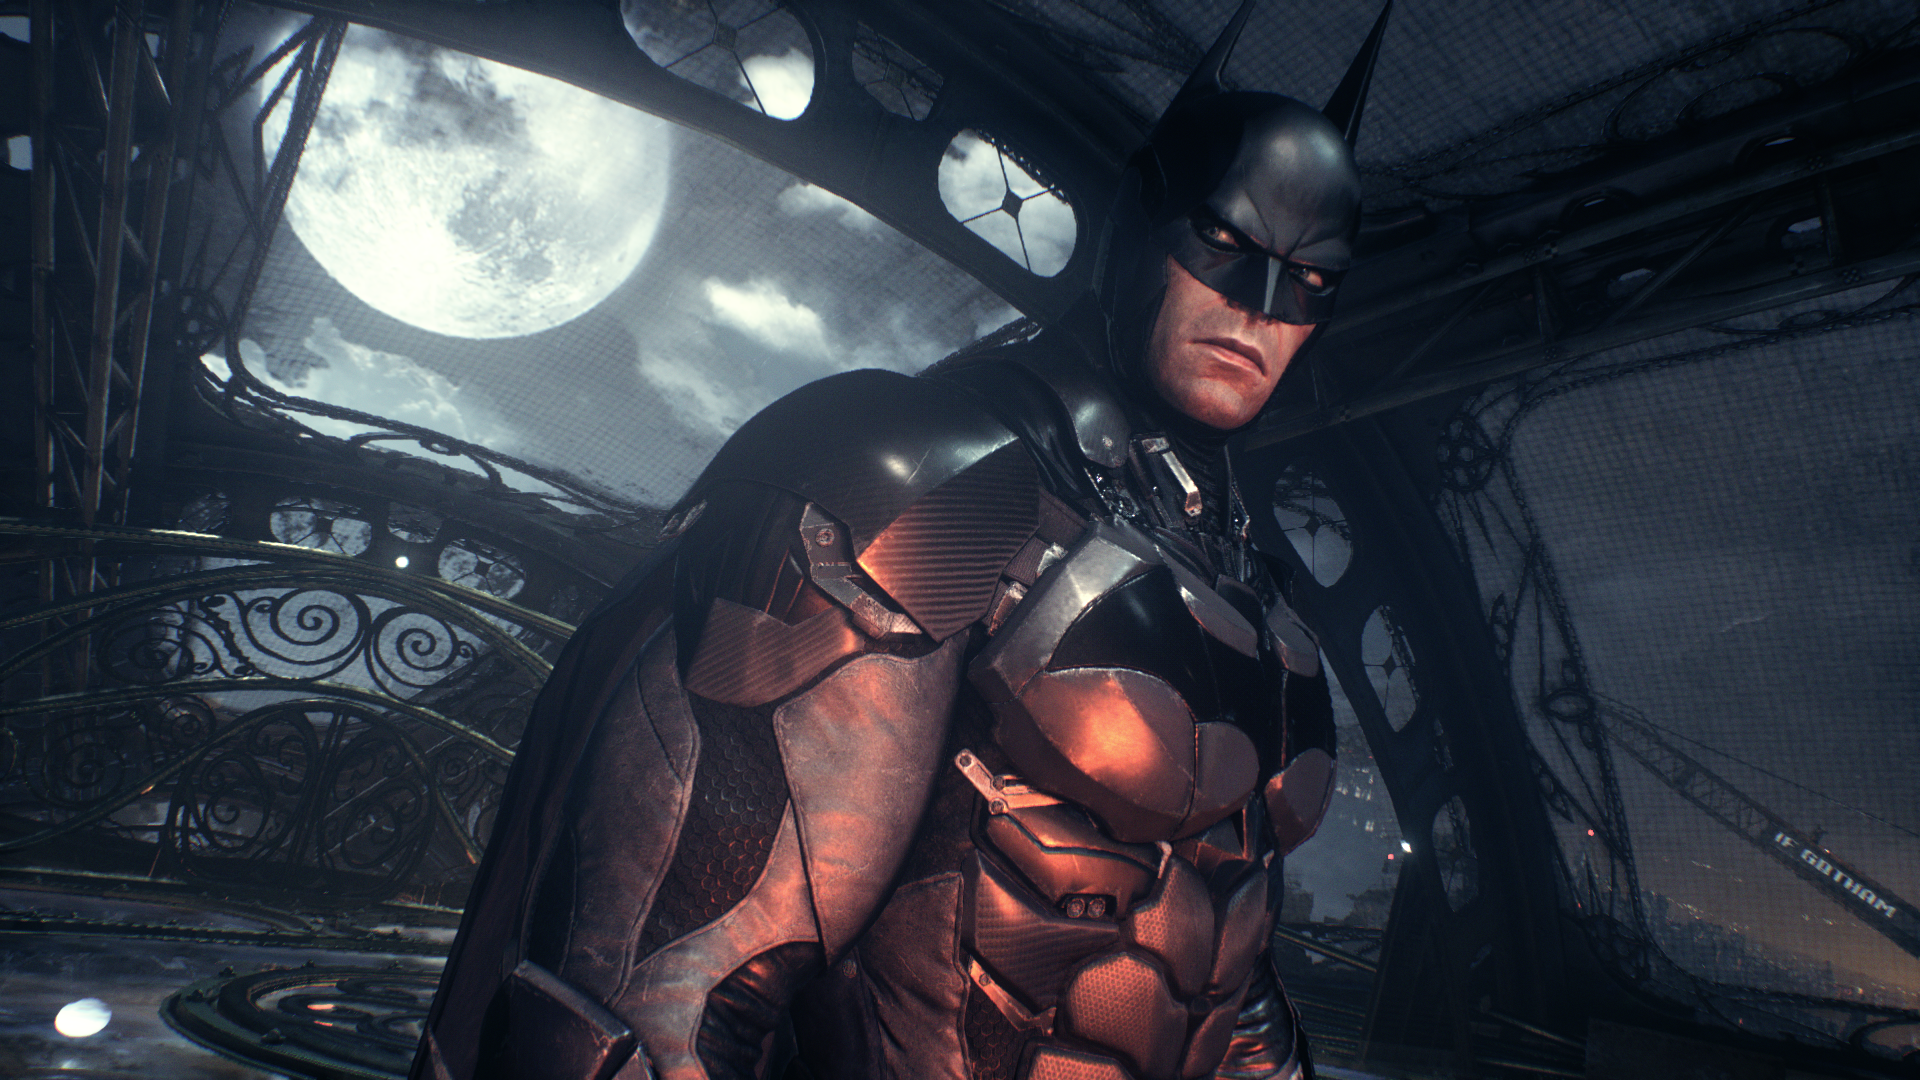 batman_arkham_knight_7_by_gamephotography-d9df06i.png